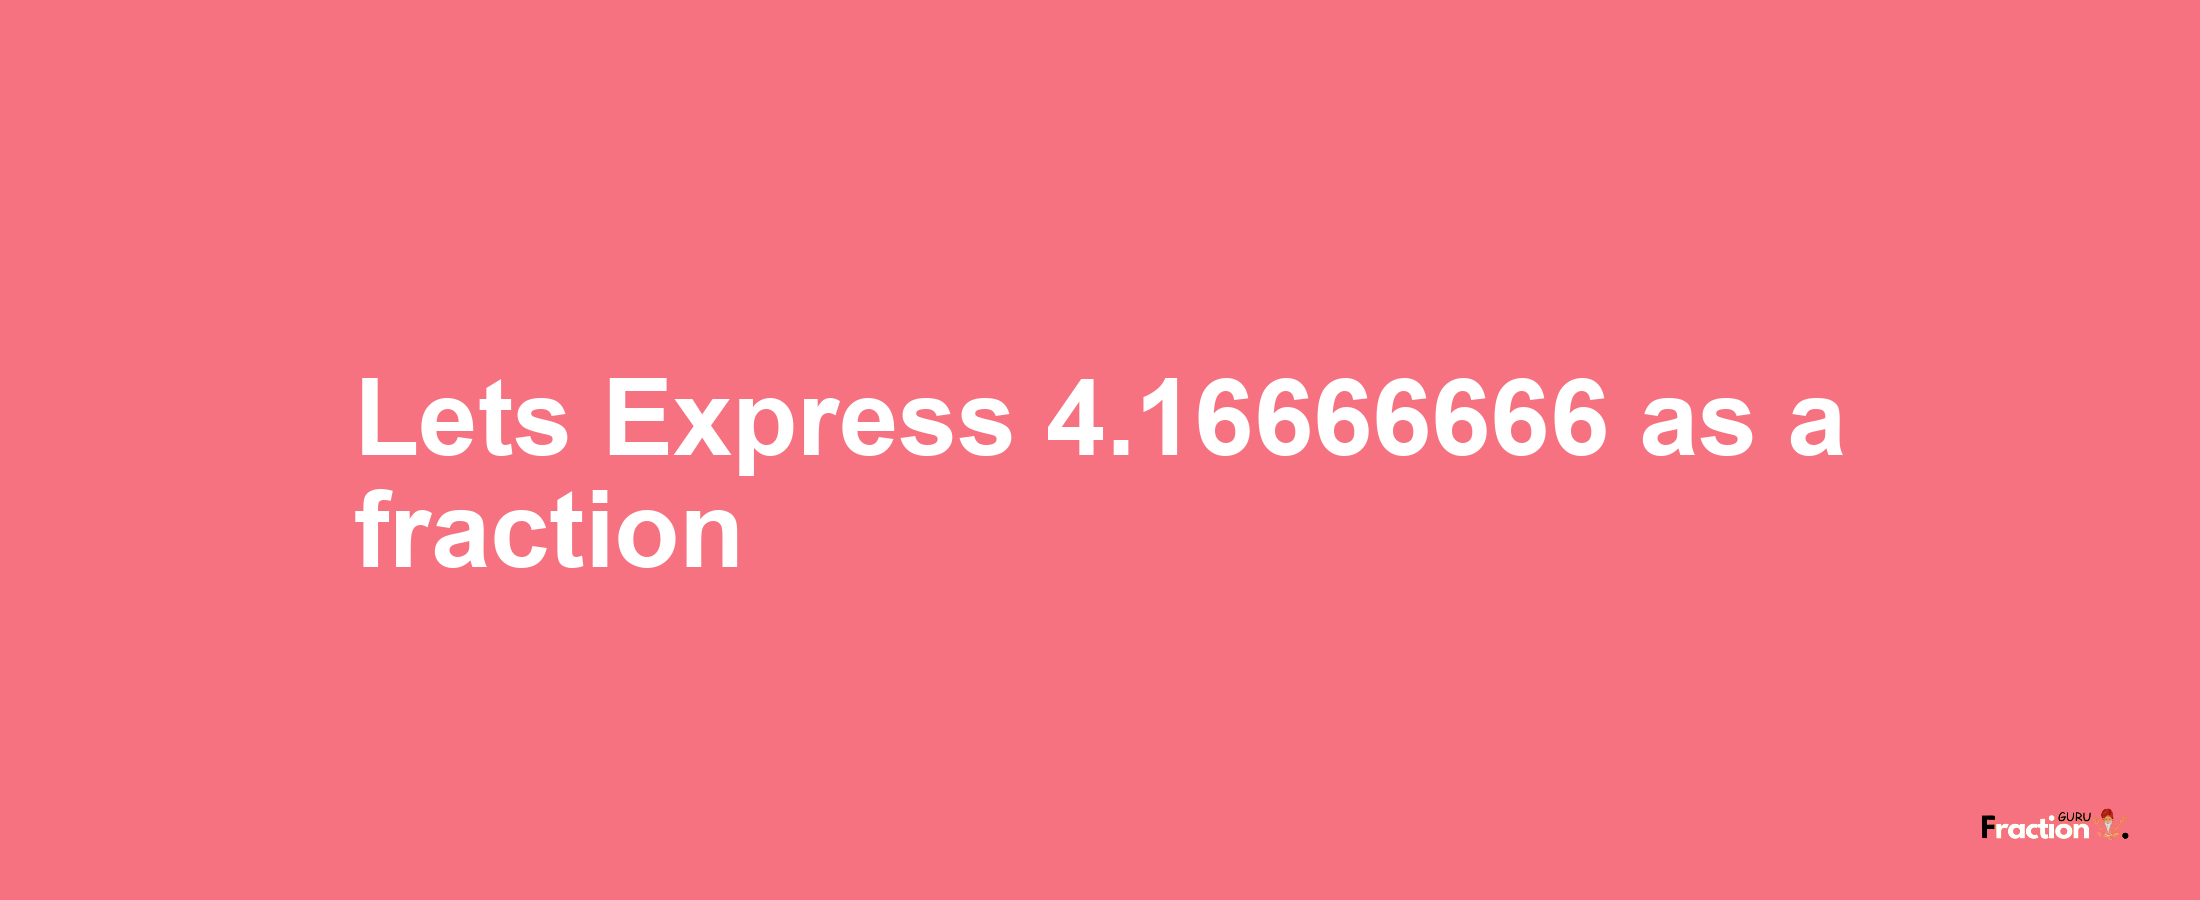 Lets Express 4.16666666 as afraction